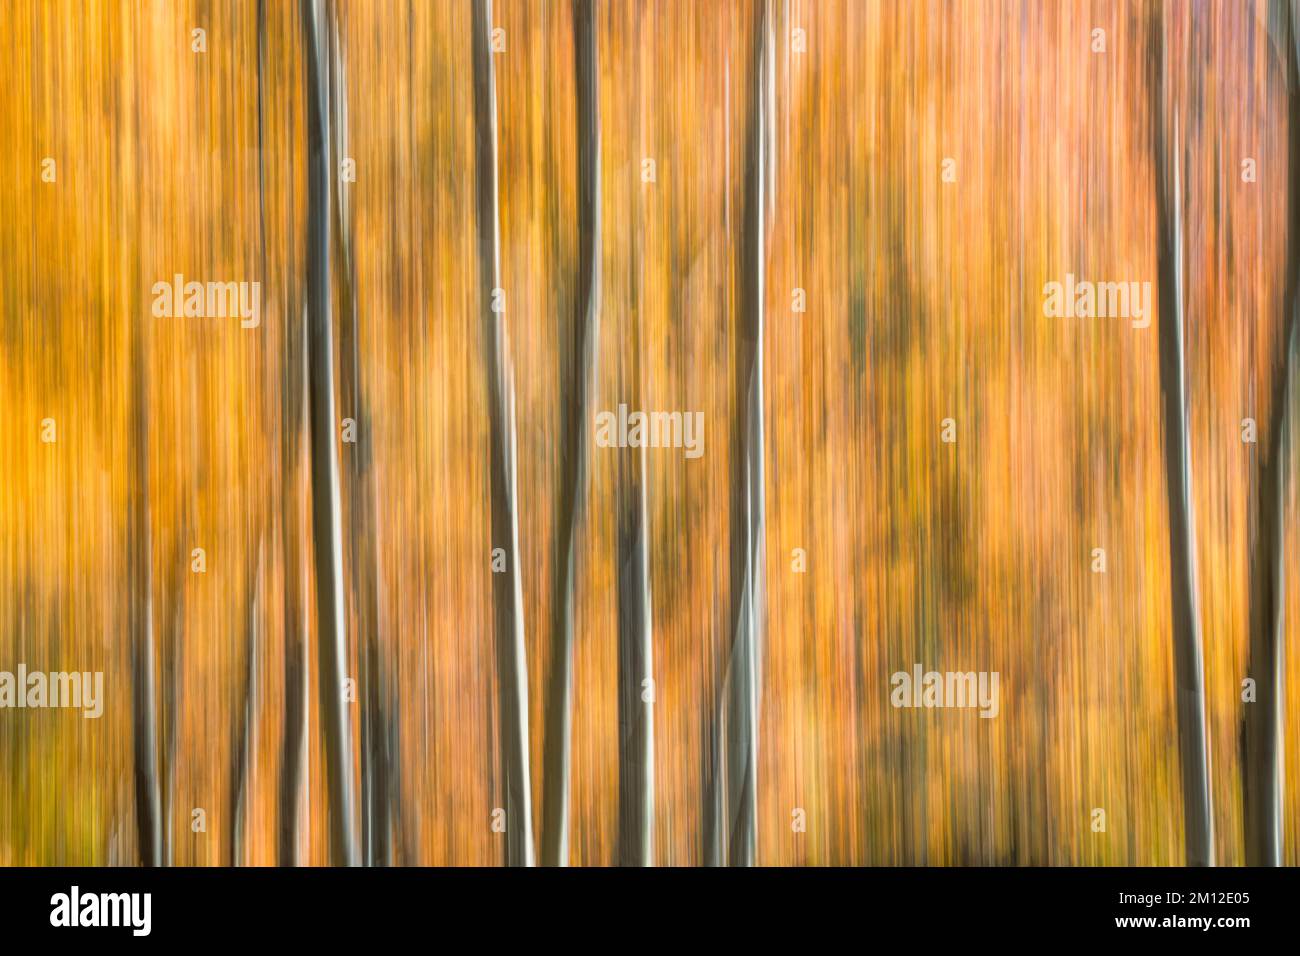 abstract image, autumn forest with tree trunks and orange leaves Stock Photo